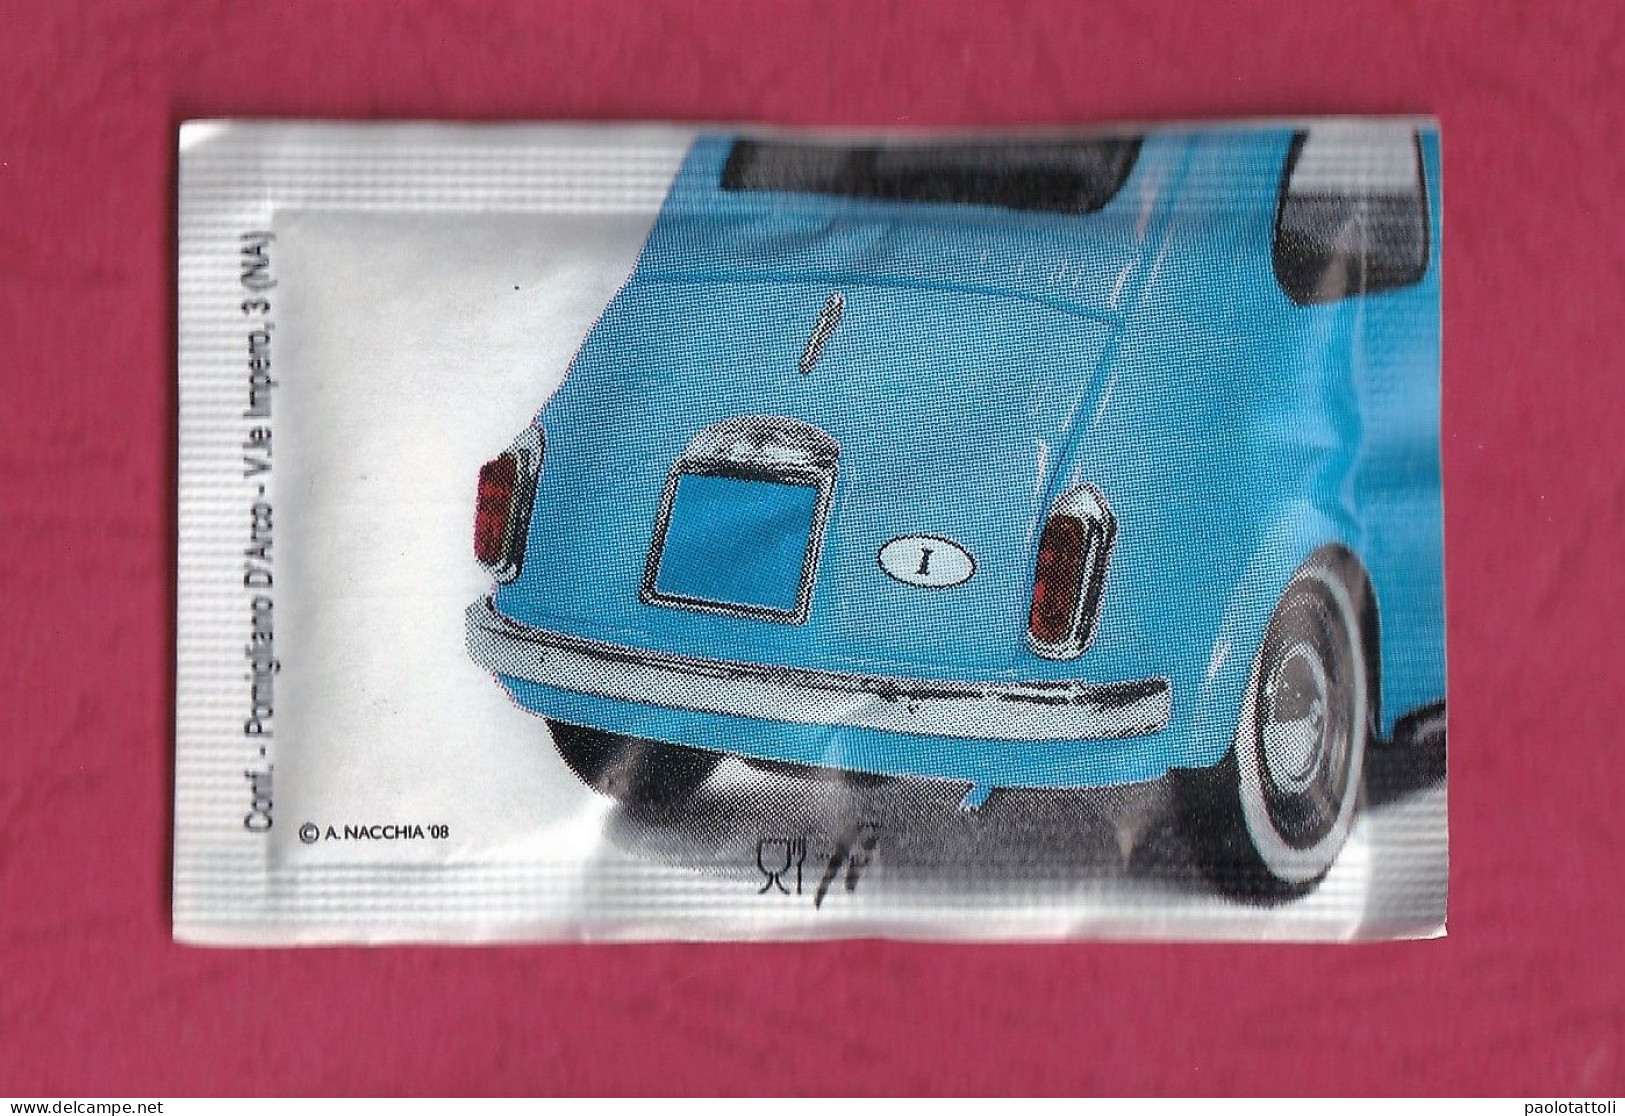 Bustina Zucchero Piena, Full Sugar Pack- Auto-Car FIAT 500. Packed At Pomigliano D'Arco-NA- - Suiker